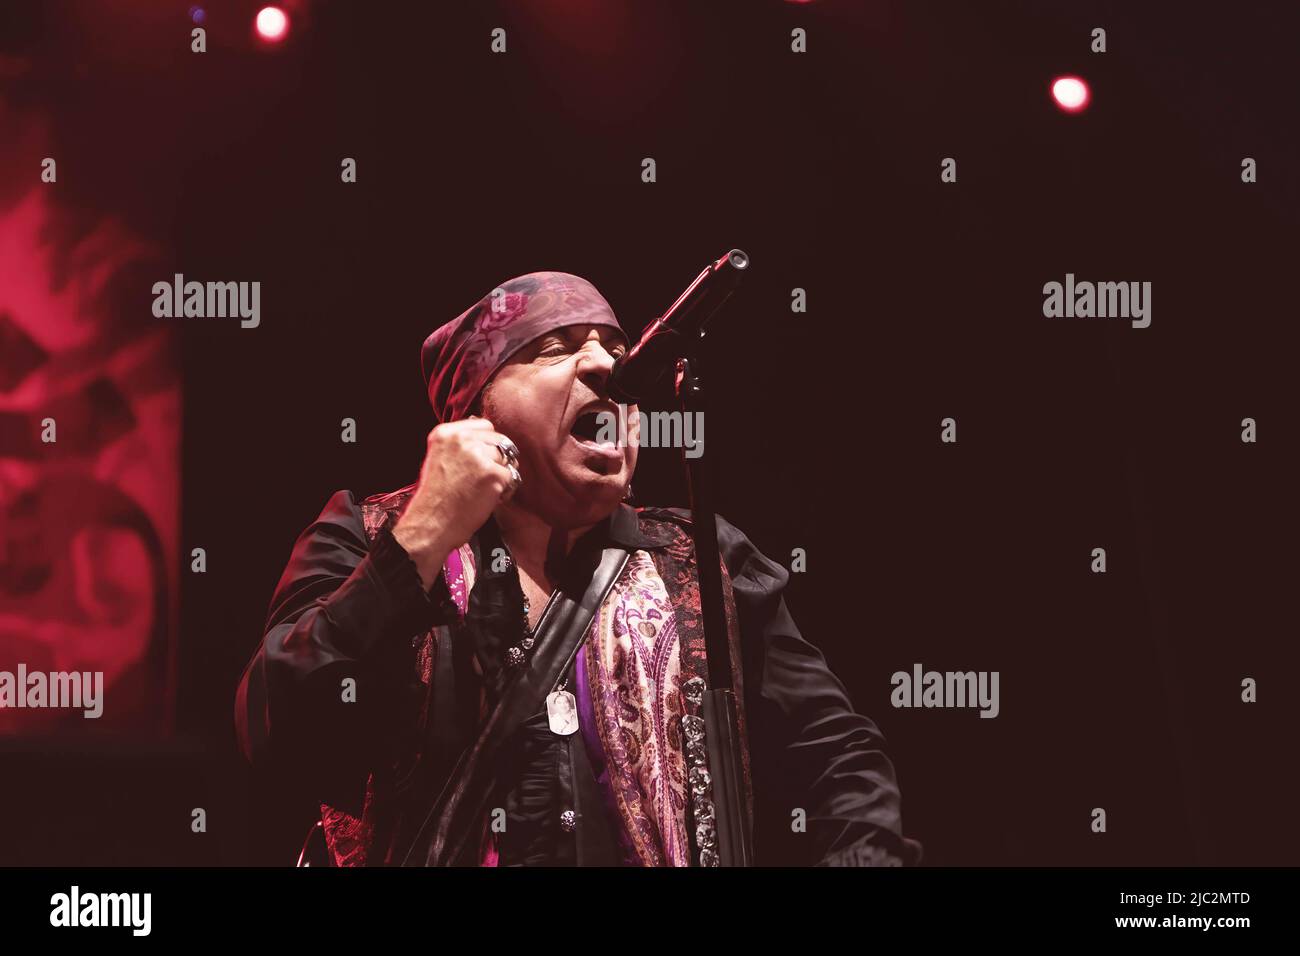 Rome, Italy. 17th July, 2018. Steven Van Zandt (born Steven Lento known as Little Steven or Miami Steve), he is best known as a member of Bruce Springsteen's E Street Band, performs live on stage with his band the Disciples of Soul at Villa Ada in Rome. (Photo by Valeria Magri/SOPA Images/Sipa USA) Credit: Sipa USA/Alamy Live News Stock Photo